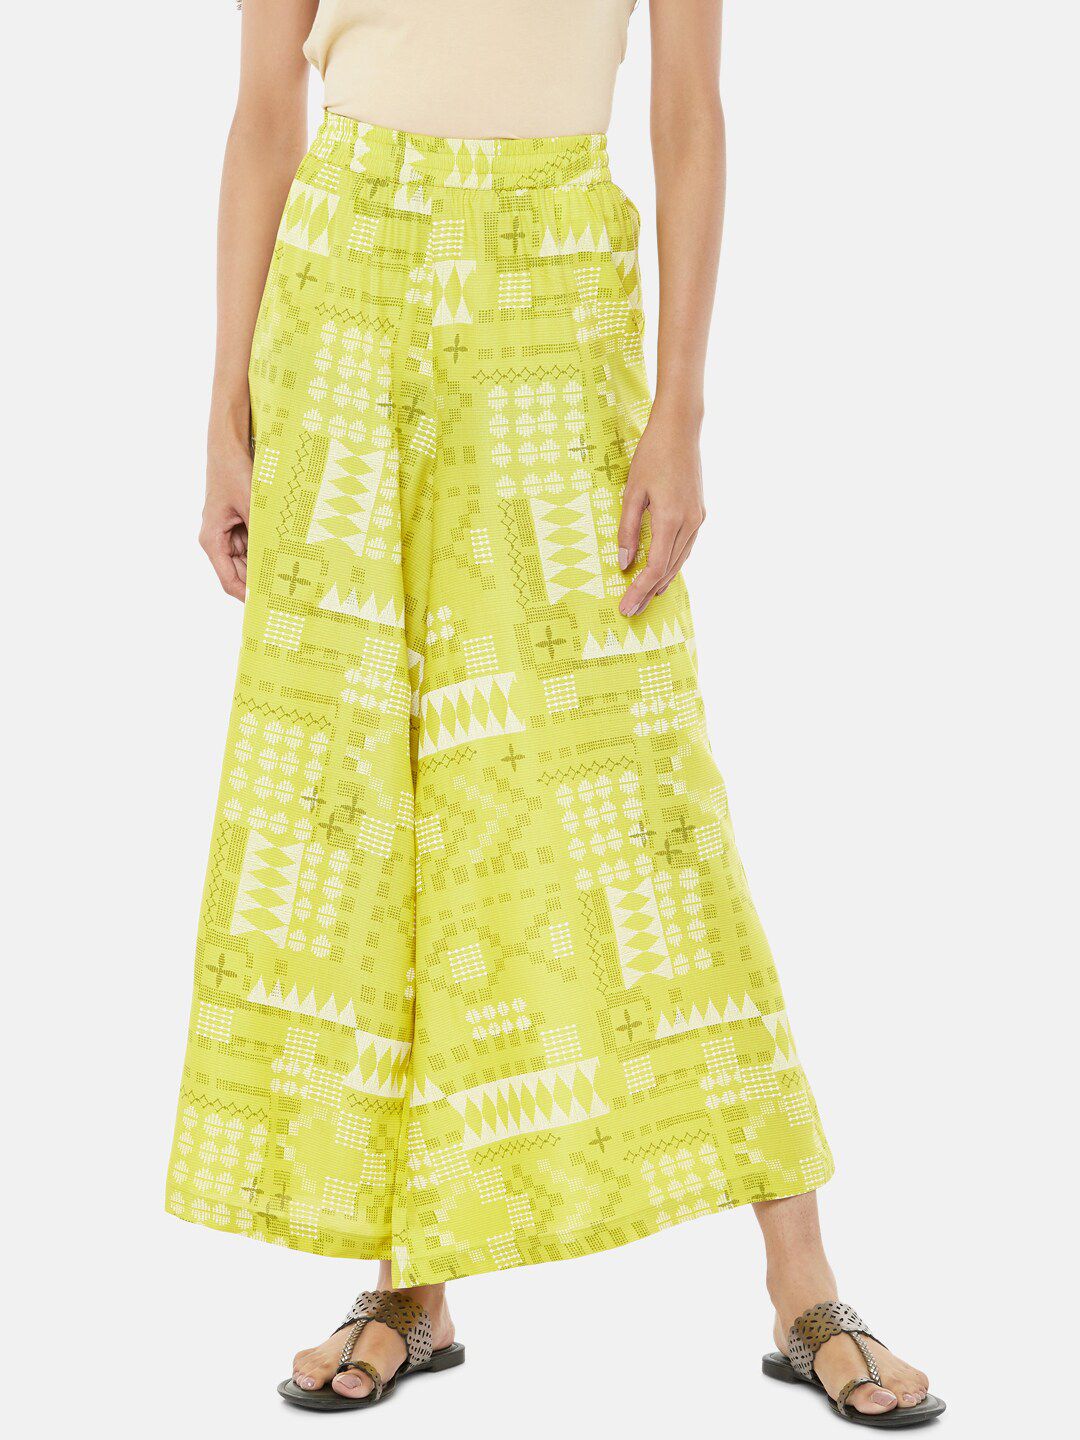 RANGMANCH BY PANTALOONS Women Lime Green & White Printed Wide Leg Palazzos Price in India